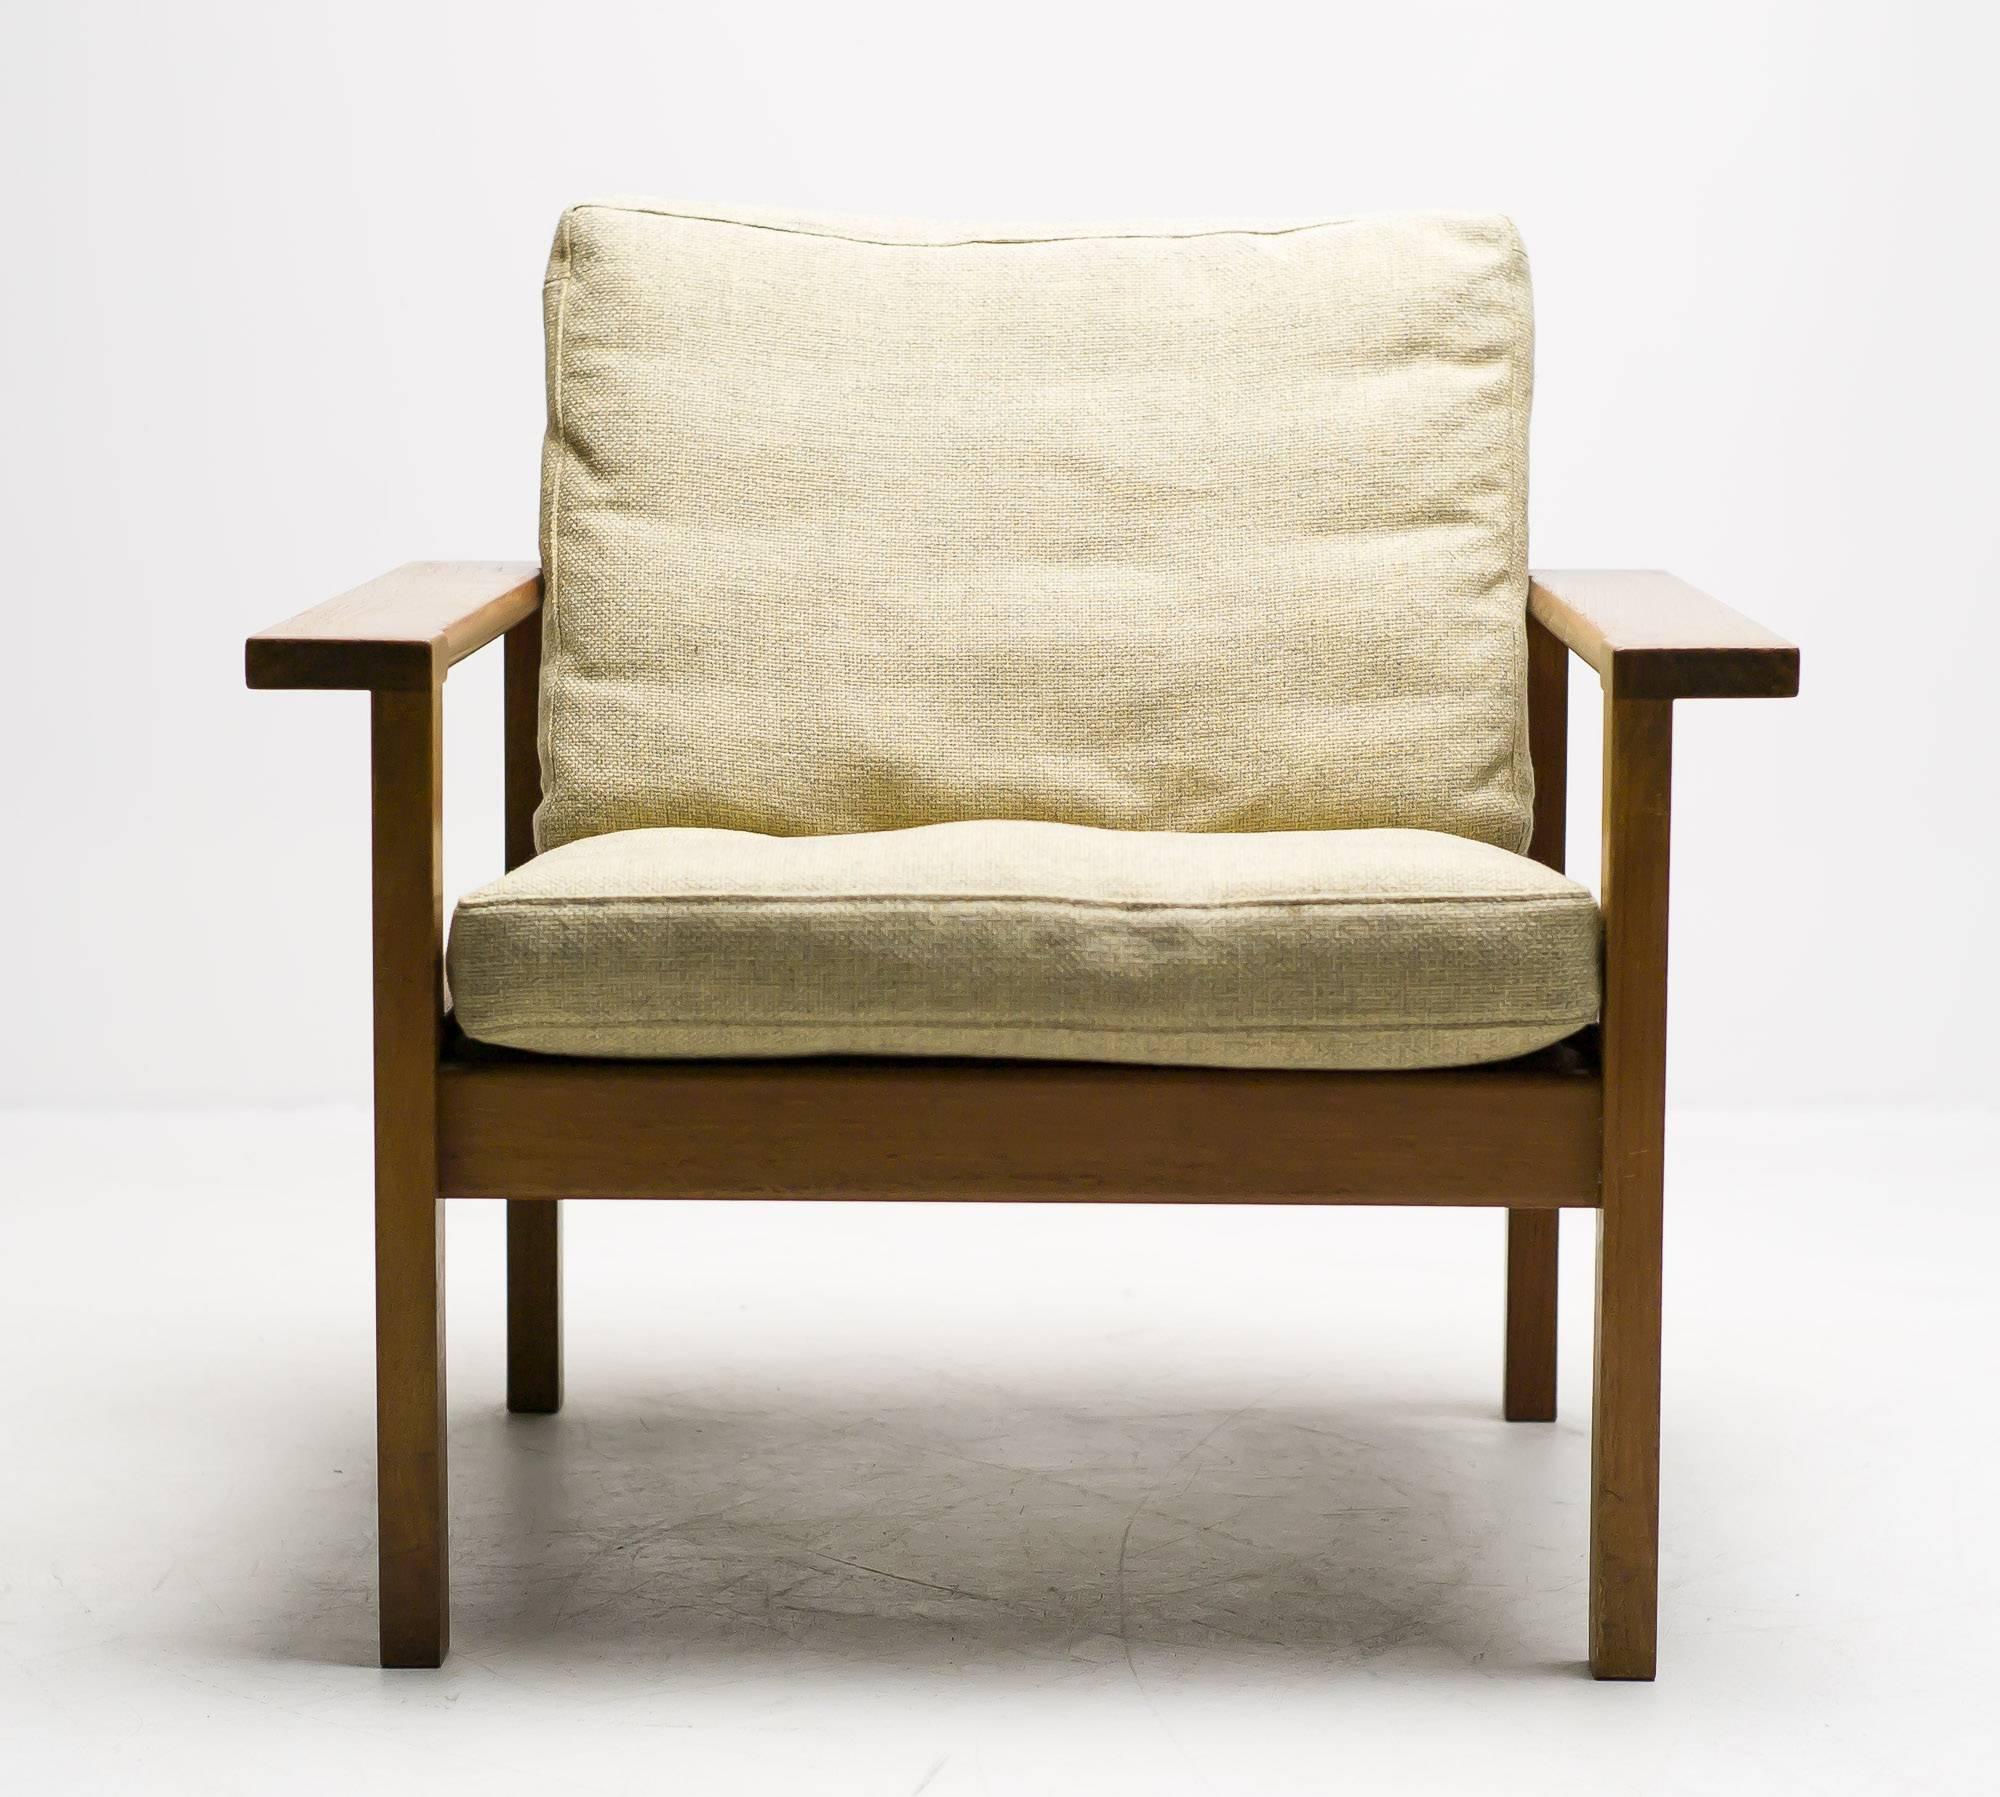 Hans J. Wegner armchair, circa 1950. Produced by GETAMA, Denmark. Solid oak frame, original sprung cushions with the original wool fabric in excellent condition.

Excellent fast and affordable worldwide shipping available.